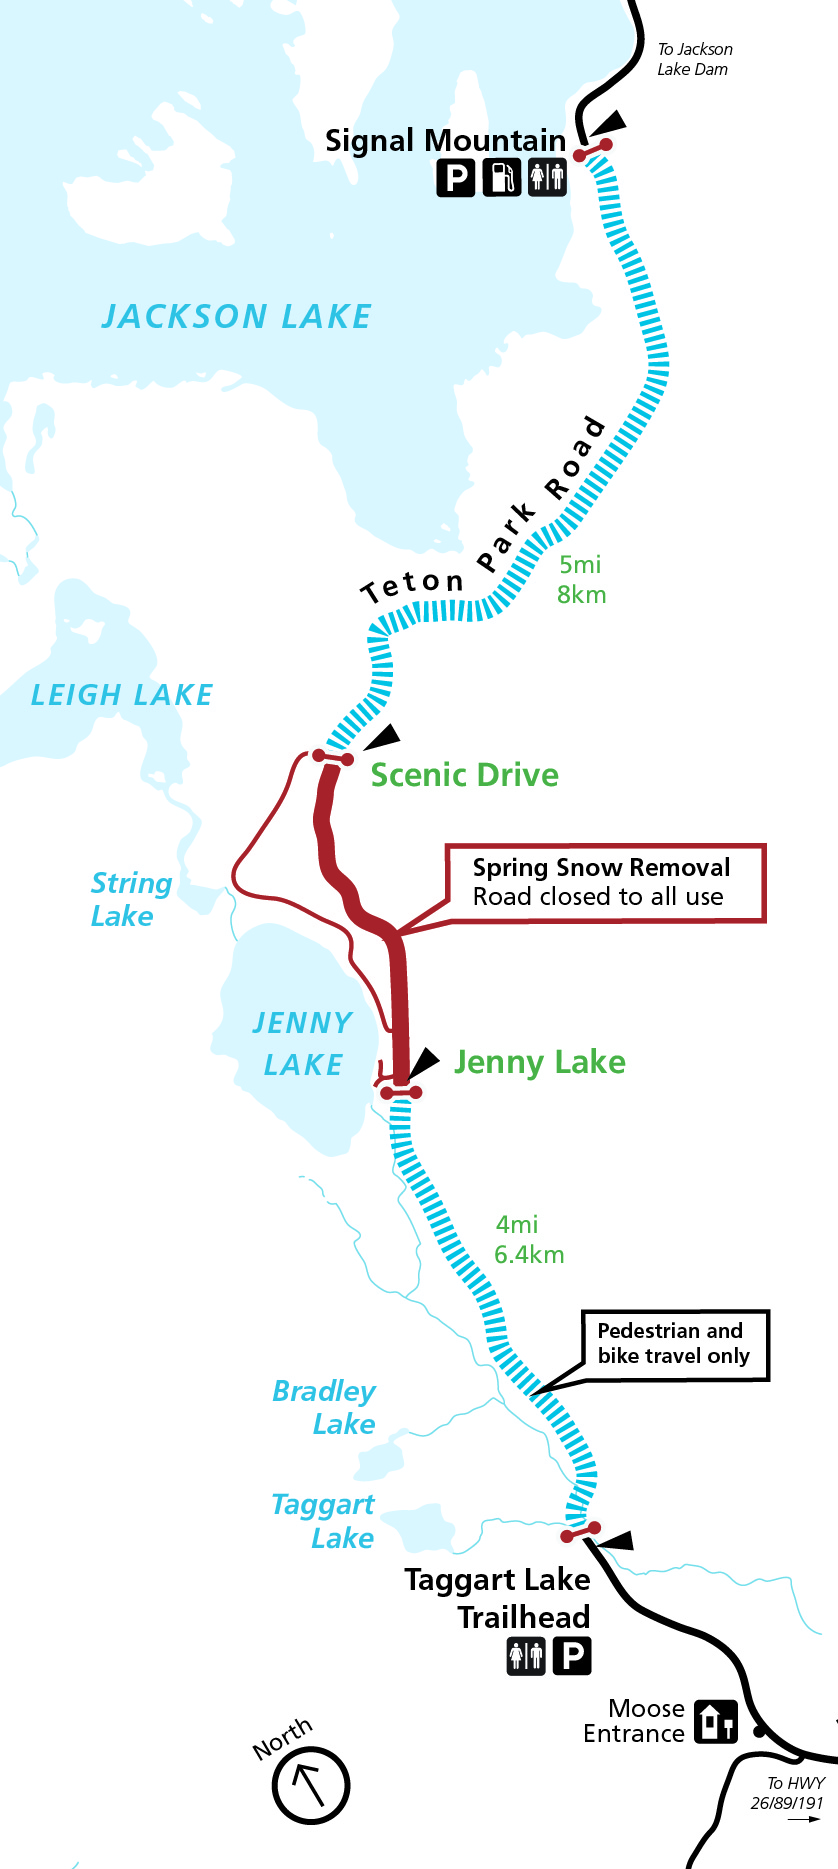 Map of Teton Park Road with open and closed sections